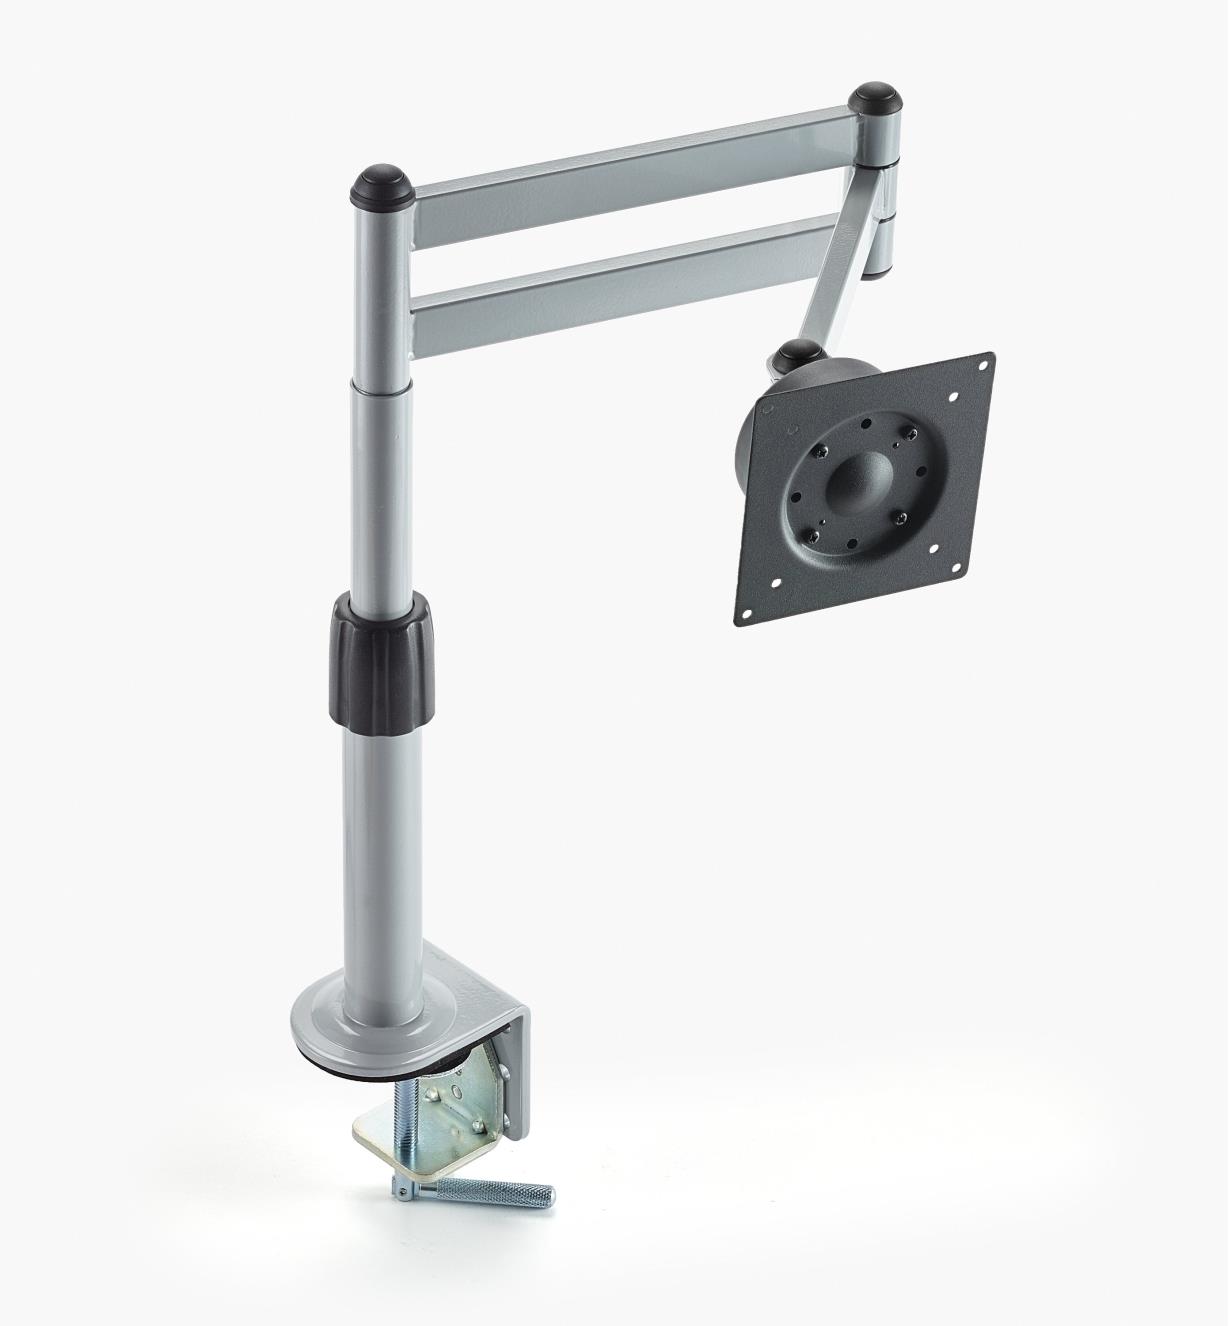 00K7931 - 15" to 25" Articulated-Arm Desk Mount